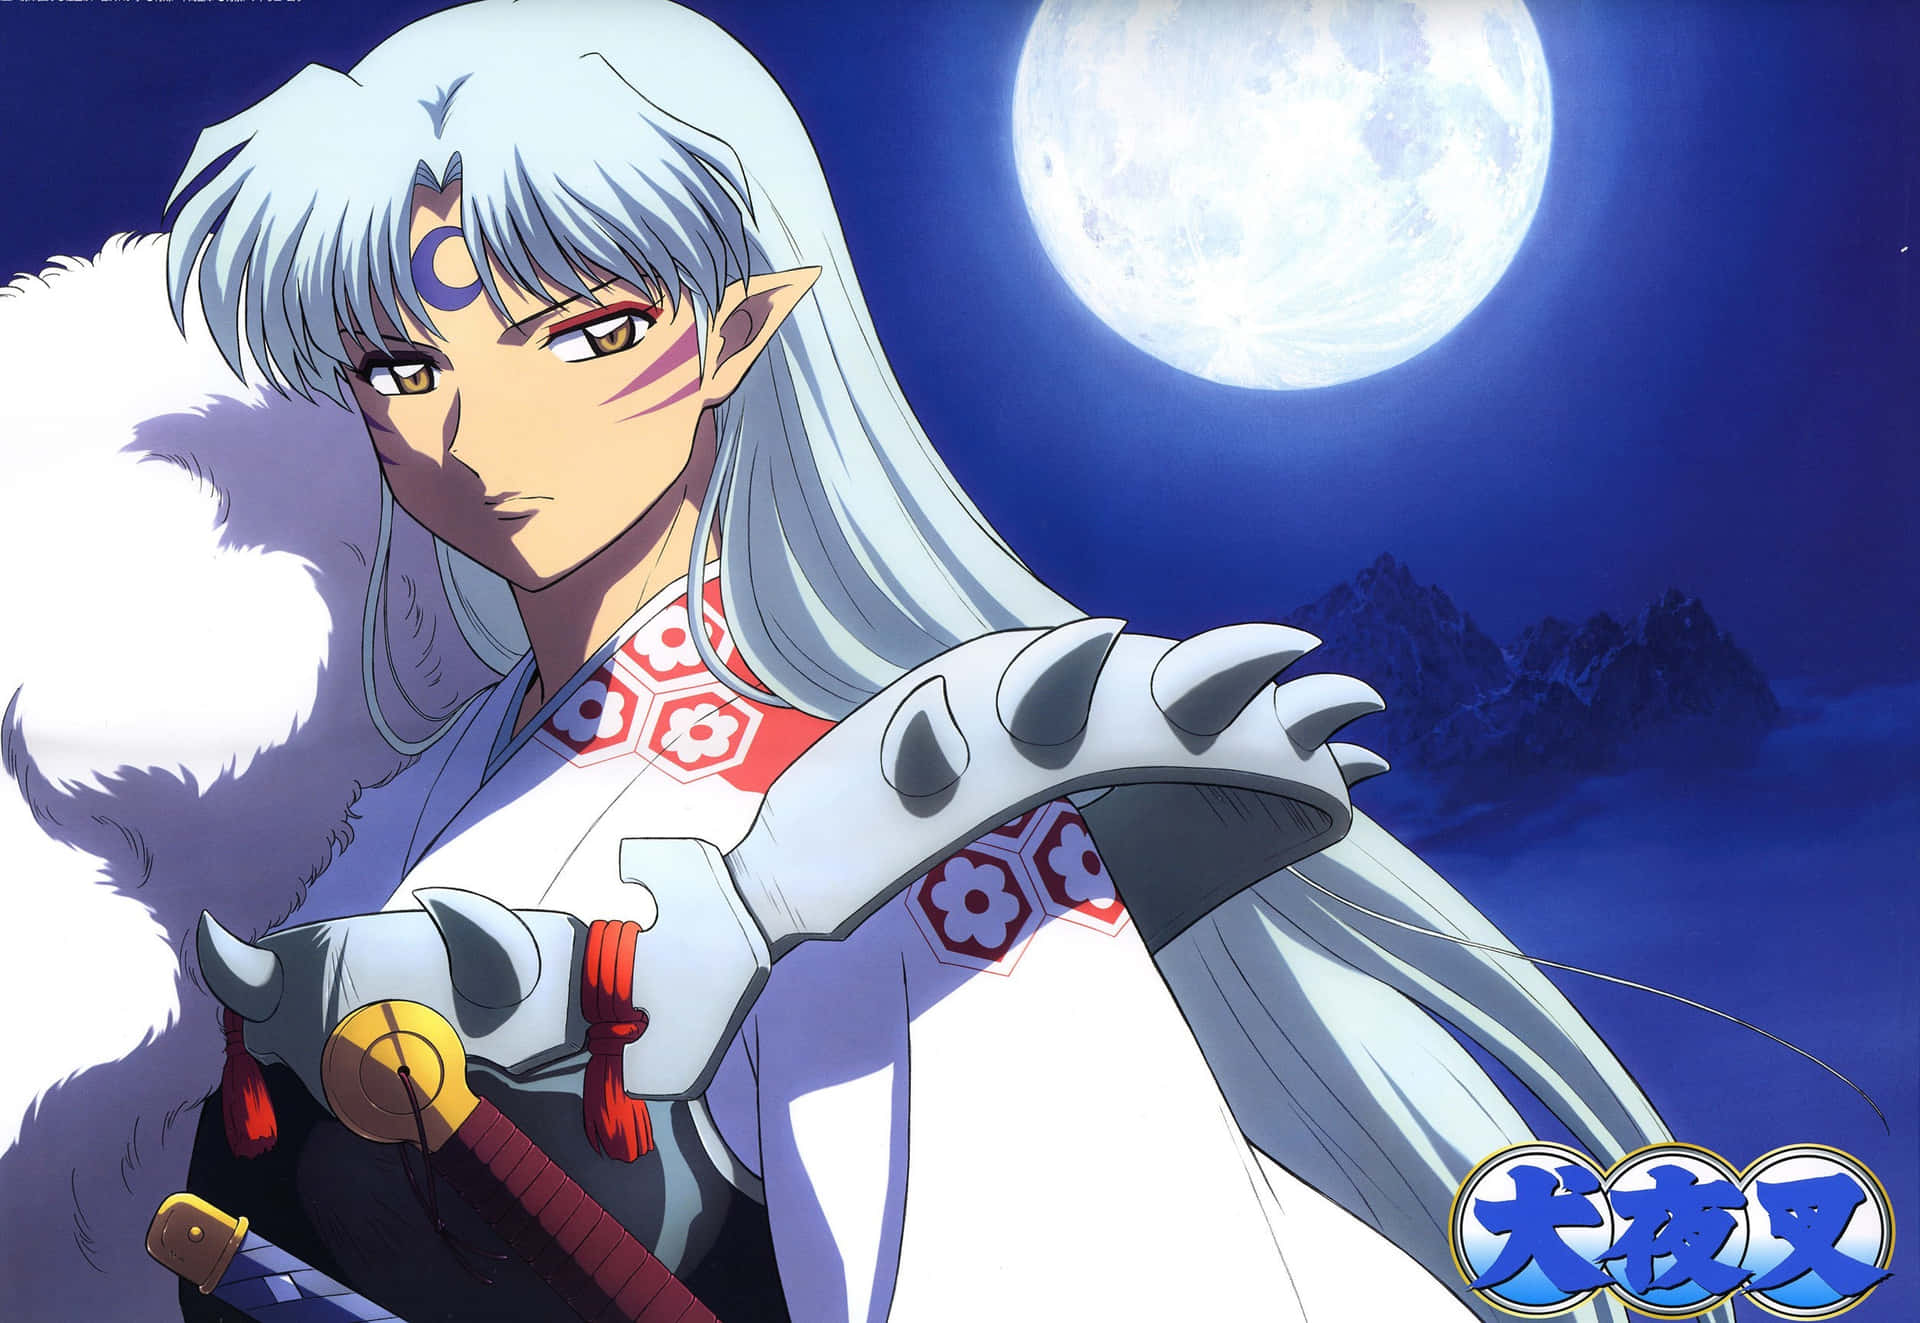 Sesshomaru, The Powerful Demon Lord, Stands Tall And Fierce. Background